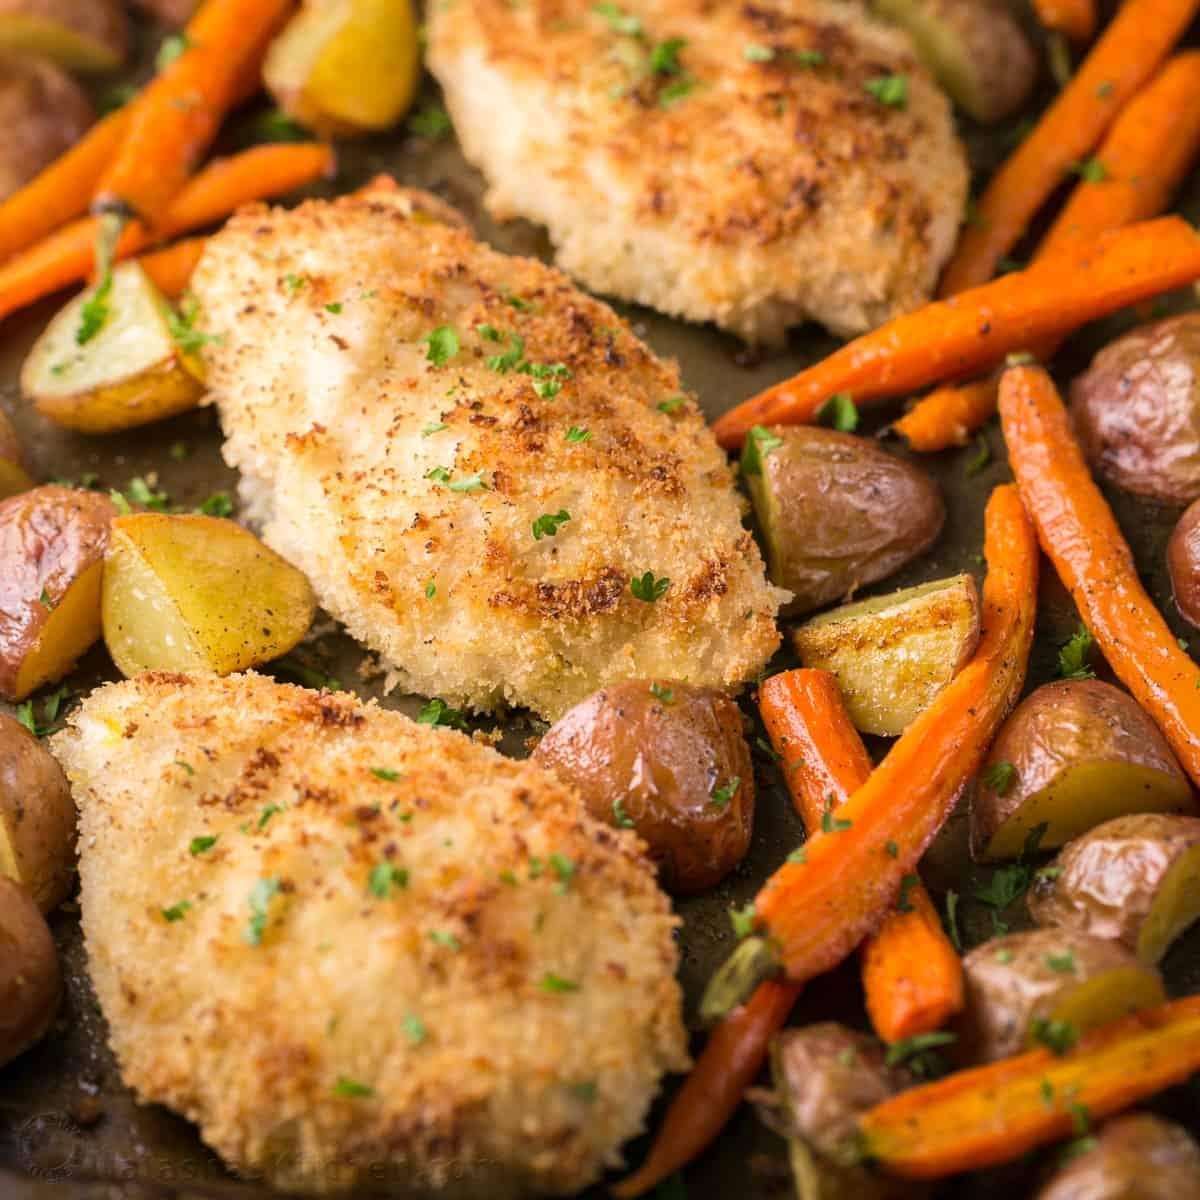 Spice Up Your Weeknight Dinner with our Easy and Delicious One-Pan Chicken and Vegetables Recipe